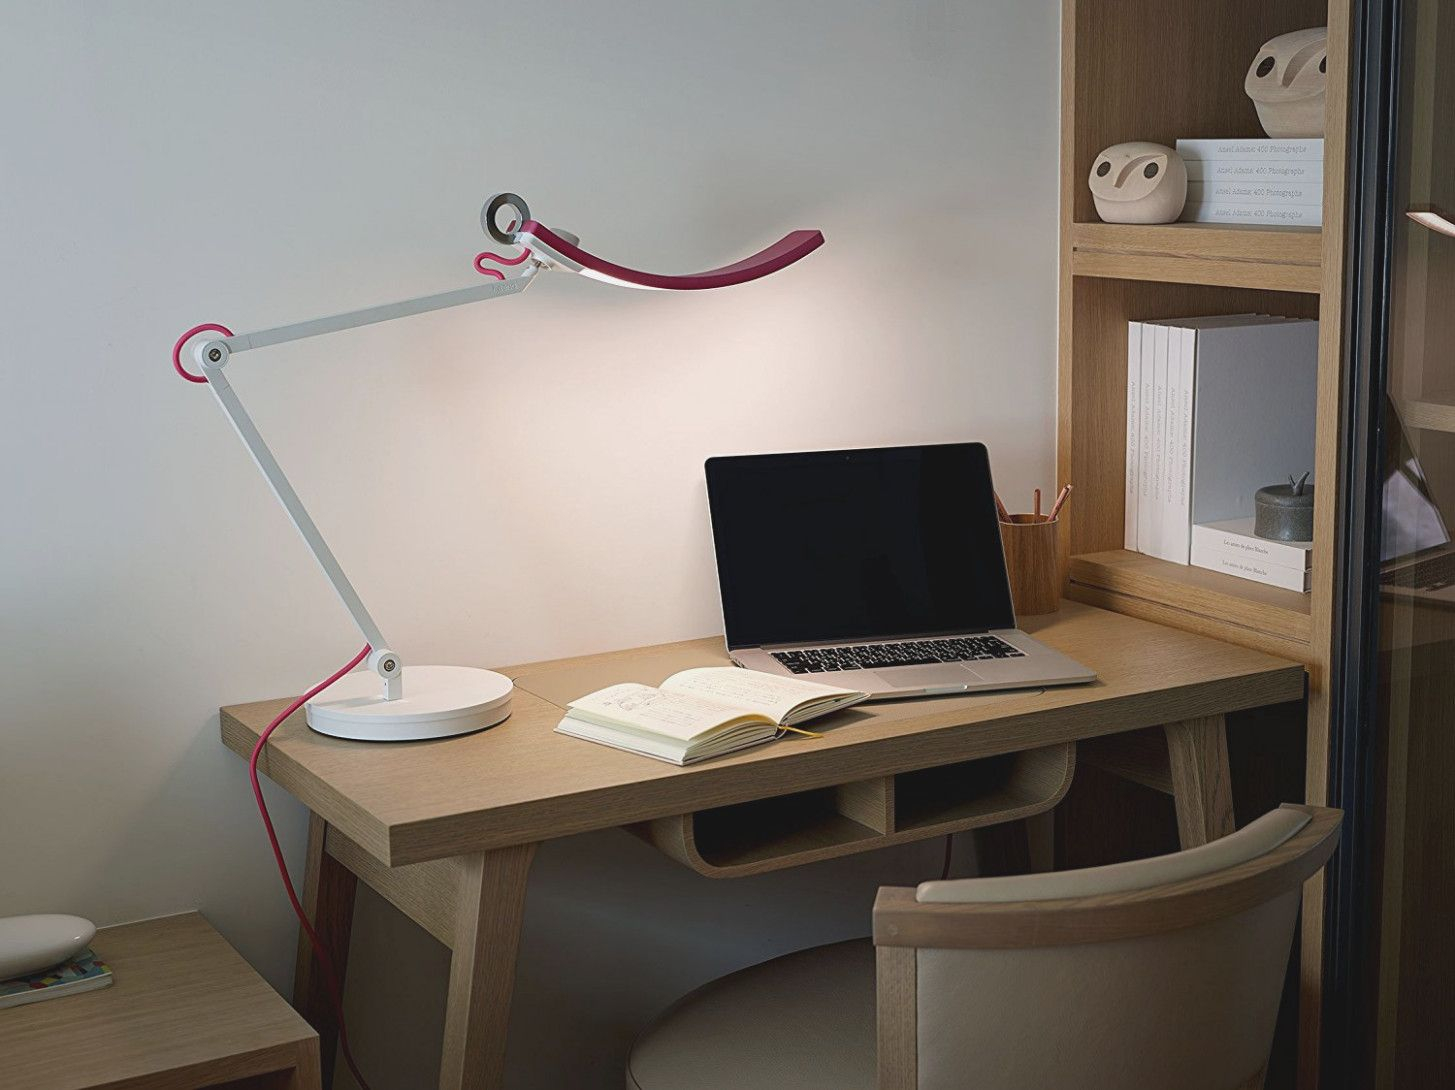 Best Desk Light For Studying Dimmable Led Desk Lamps in sizing 1455 X 1090